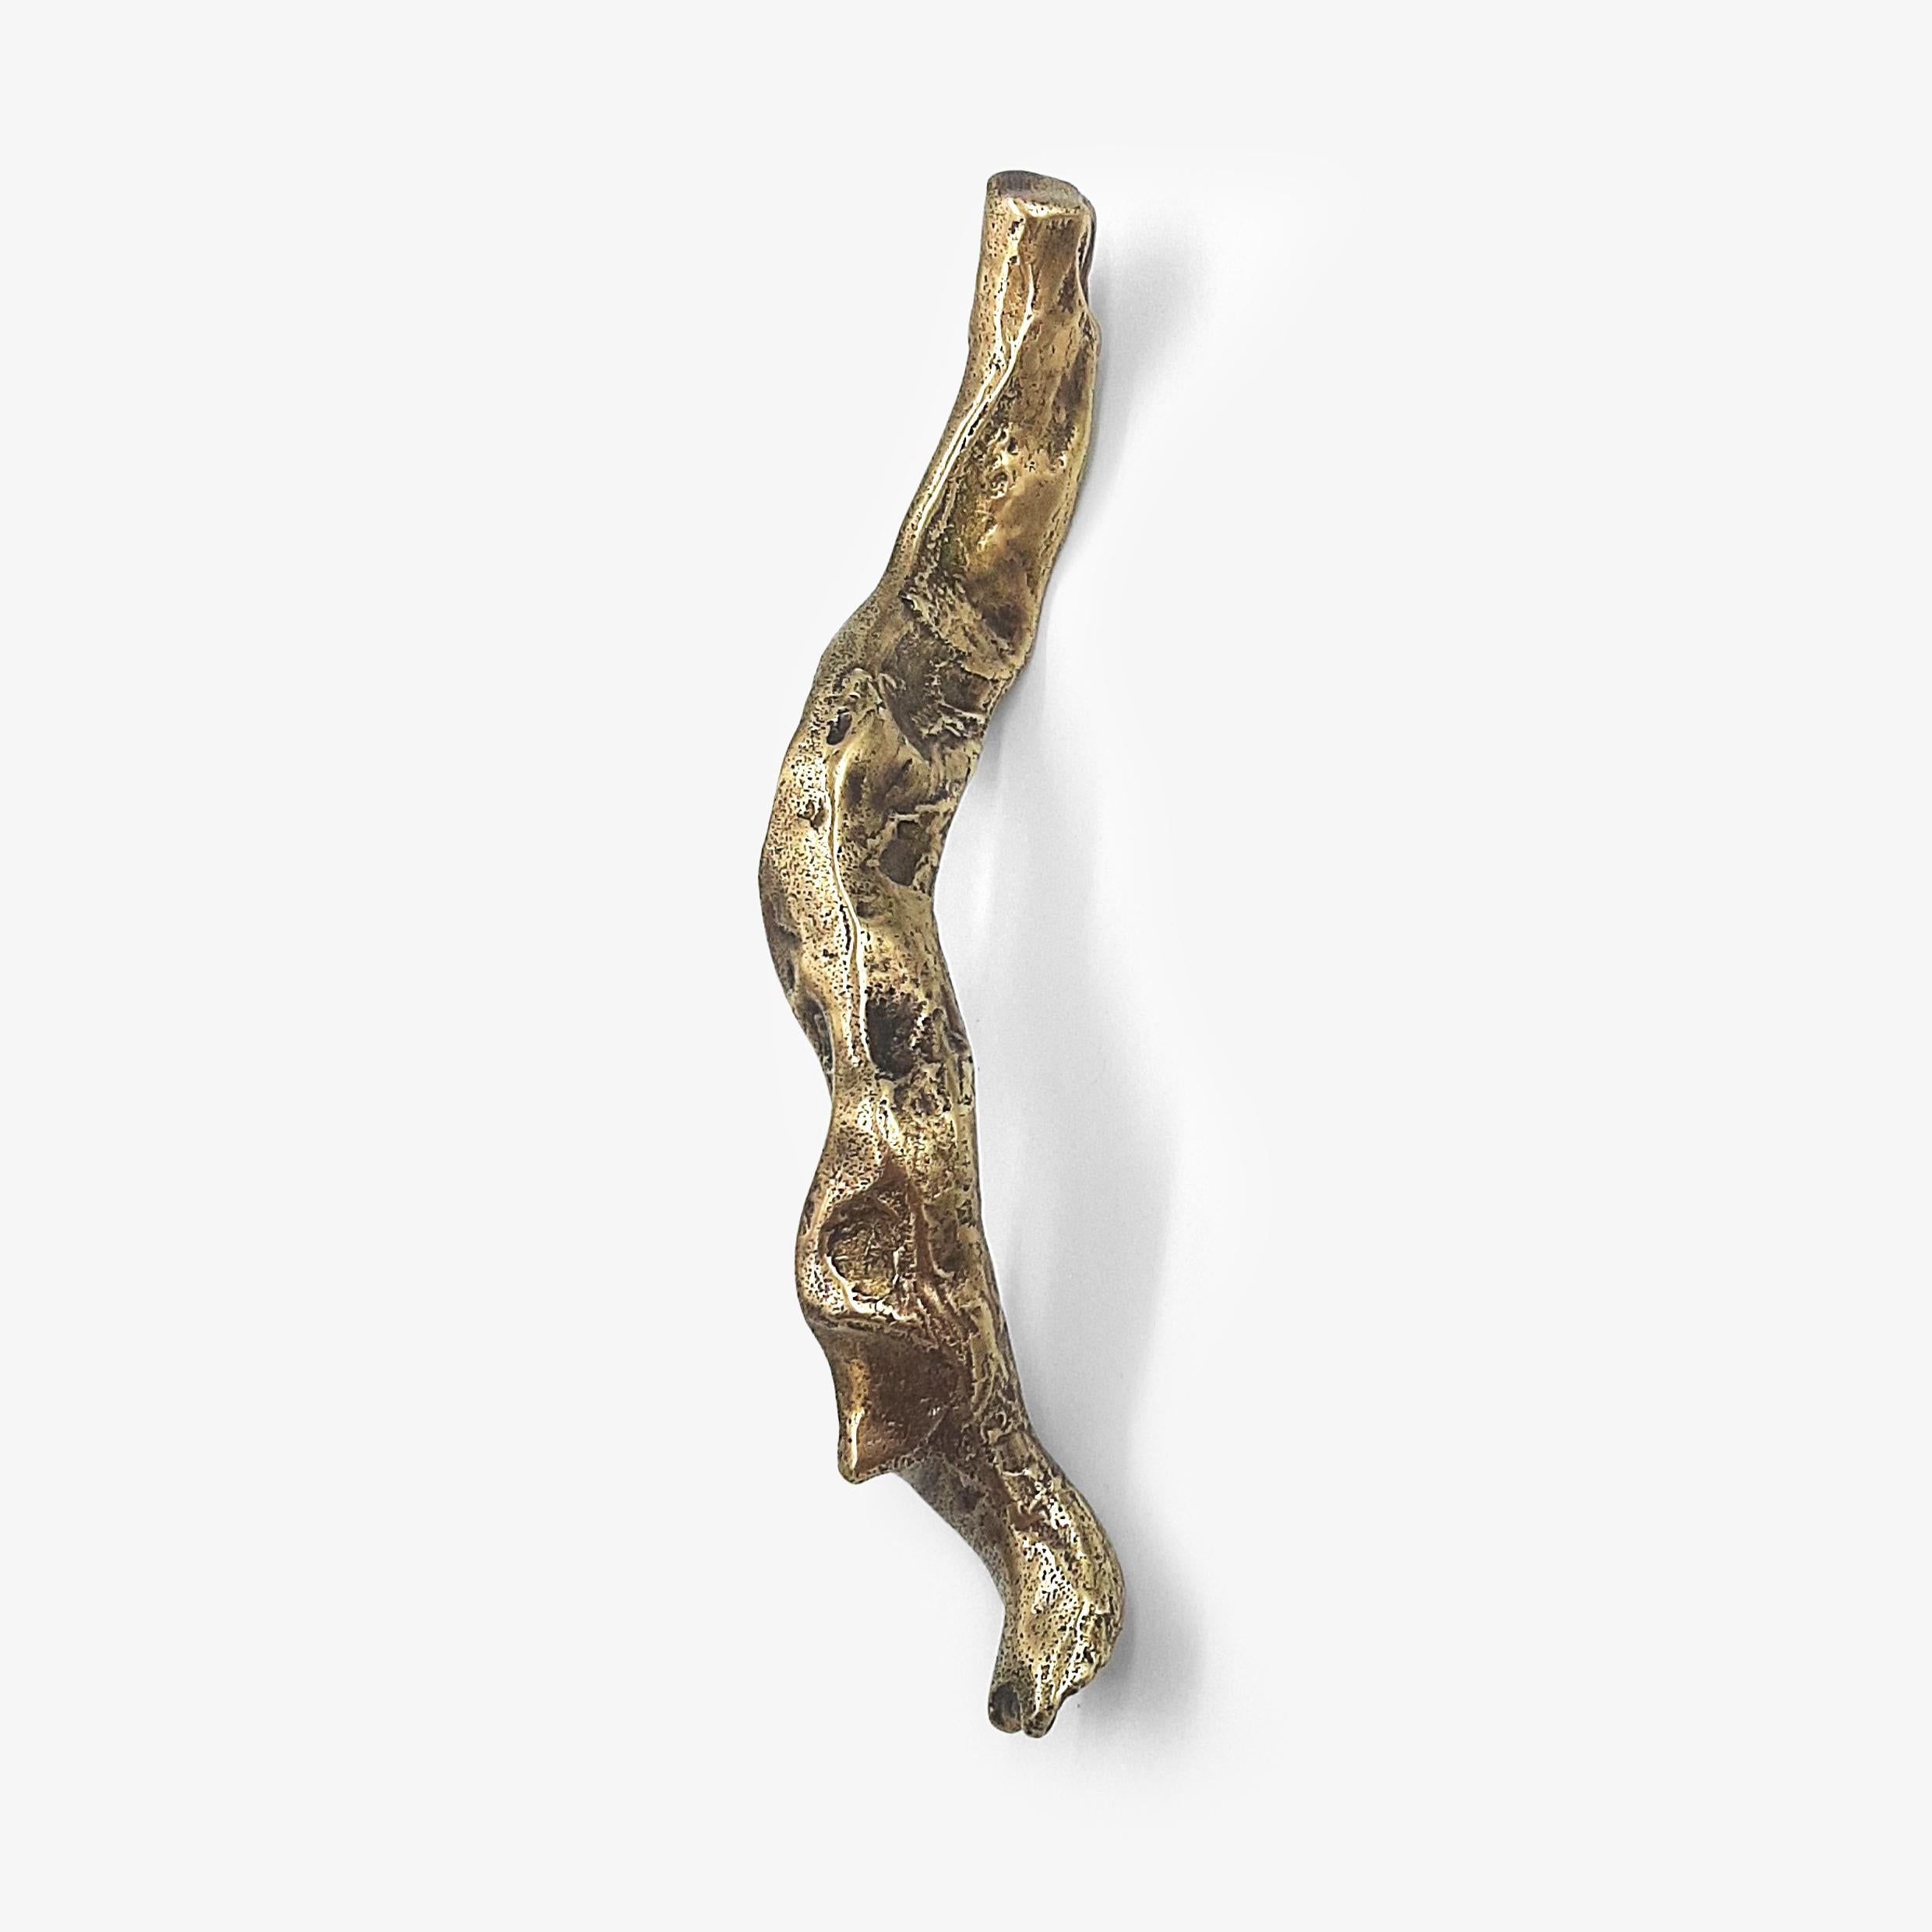 A tribute to nature, infinite source of patterns. Solid brass door handle made in our workshops.